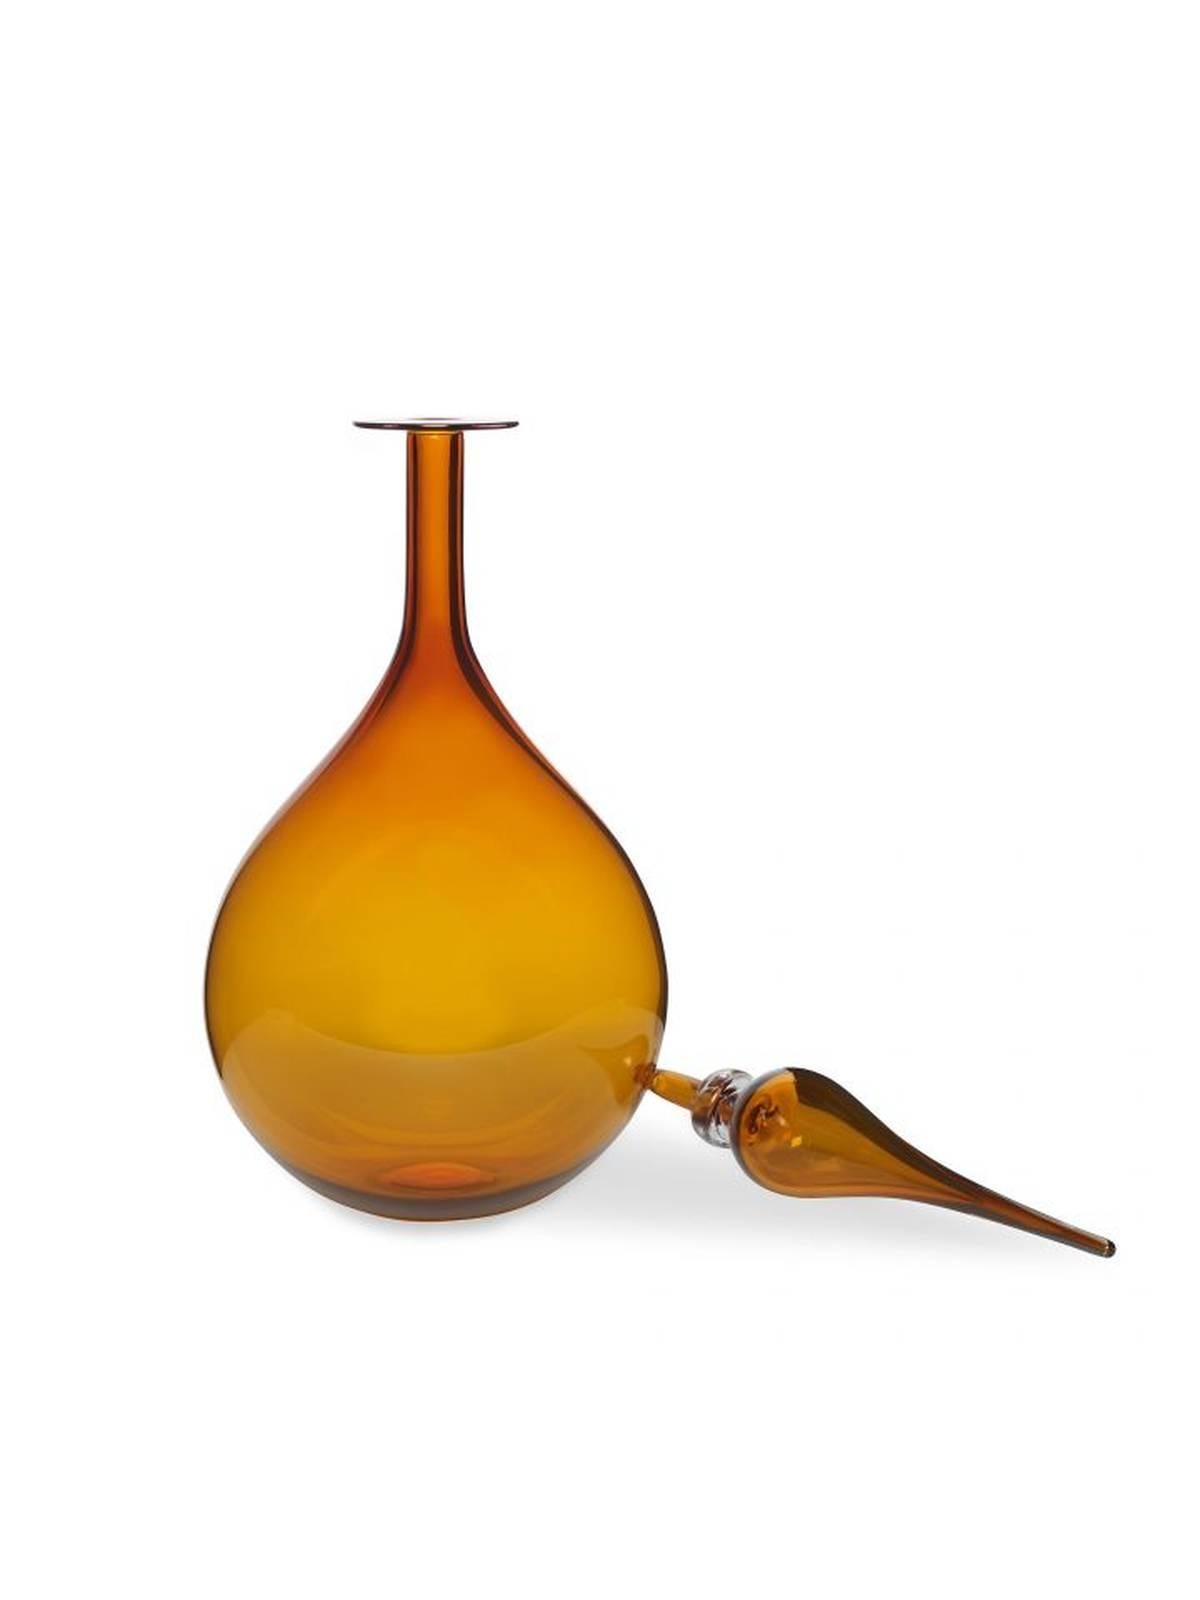 The Petite tear drop decanter by Joe Cariati features a rounded, tear drop shaped body and is detailed with a decorative glass stopper. Inspired by Mid-Century classics, handmade in LA.